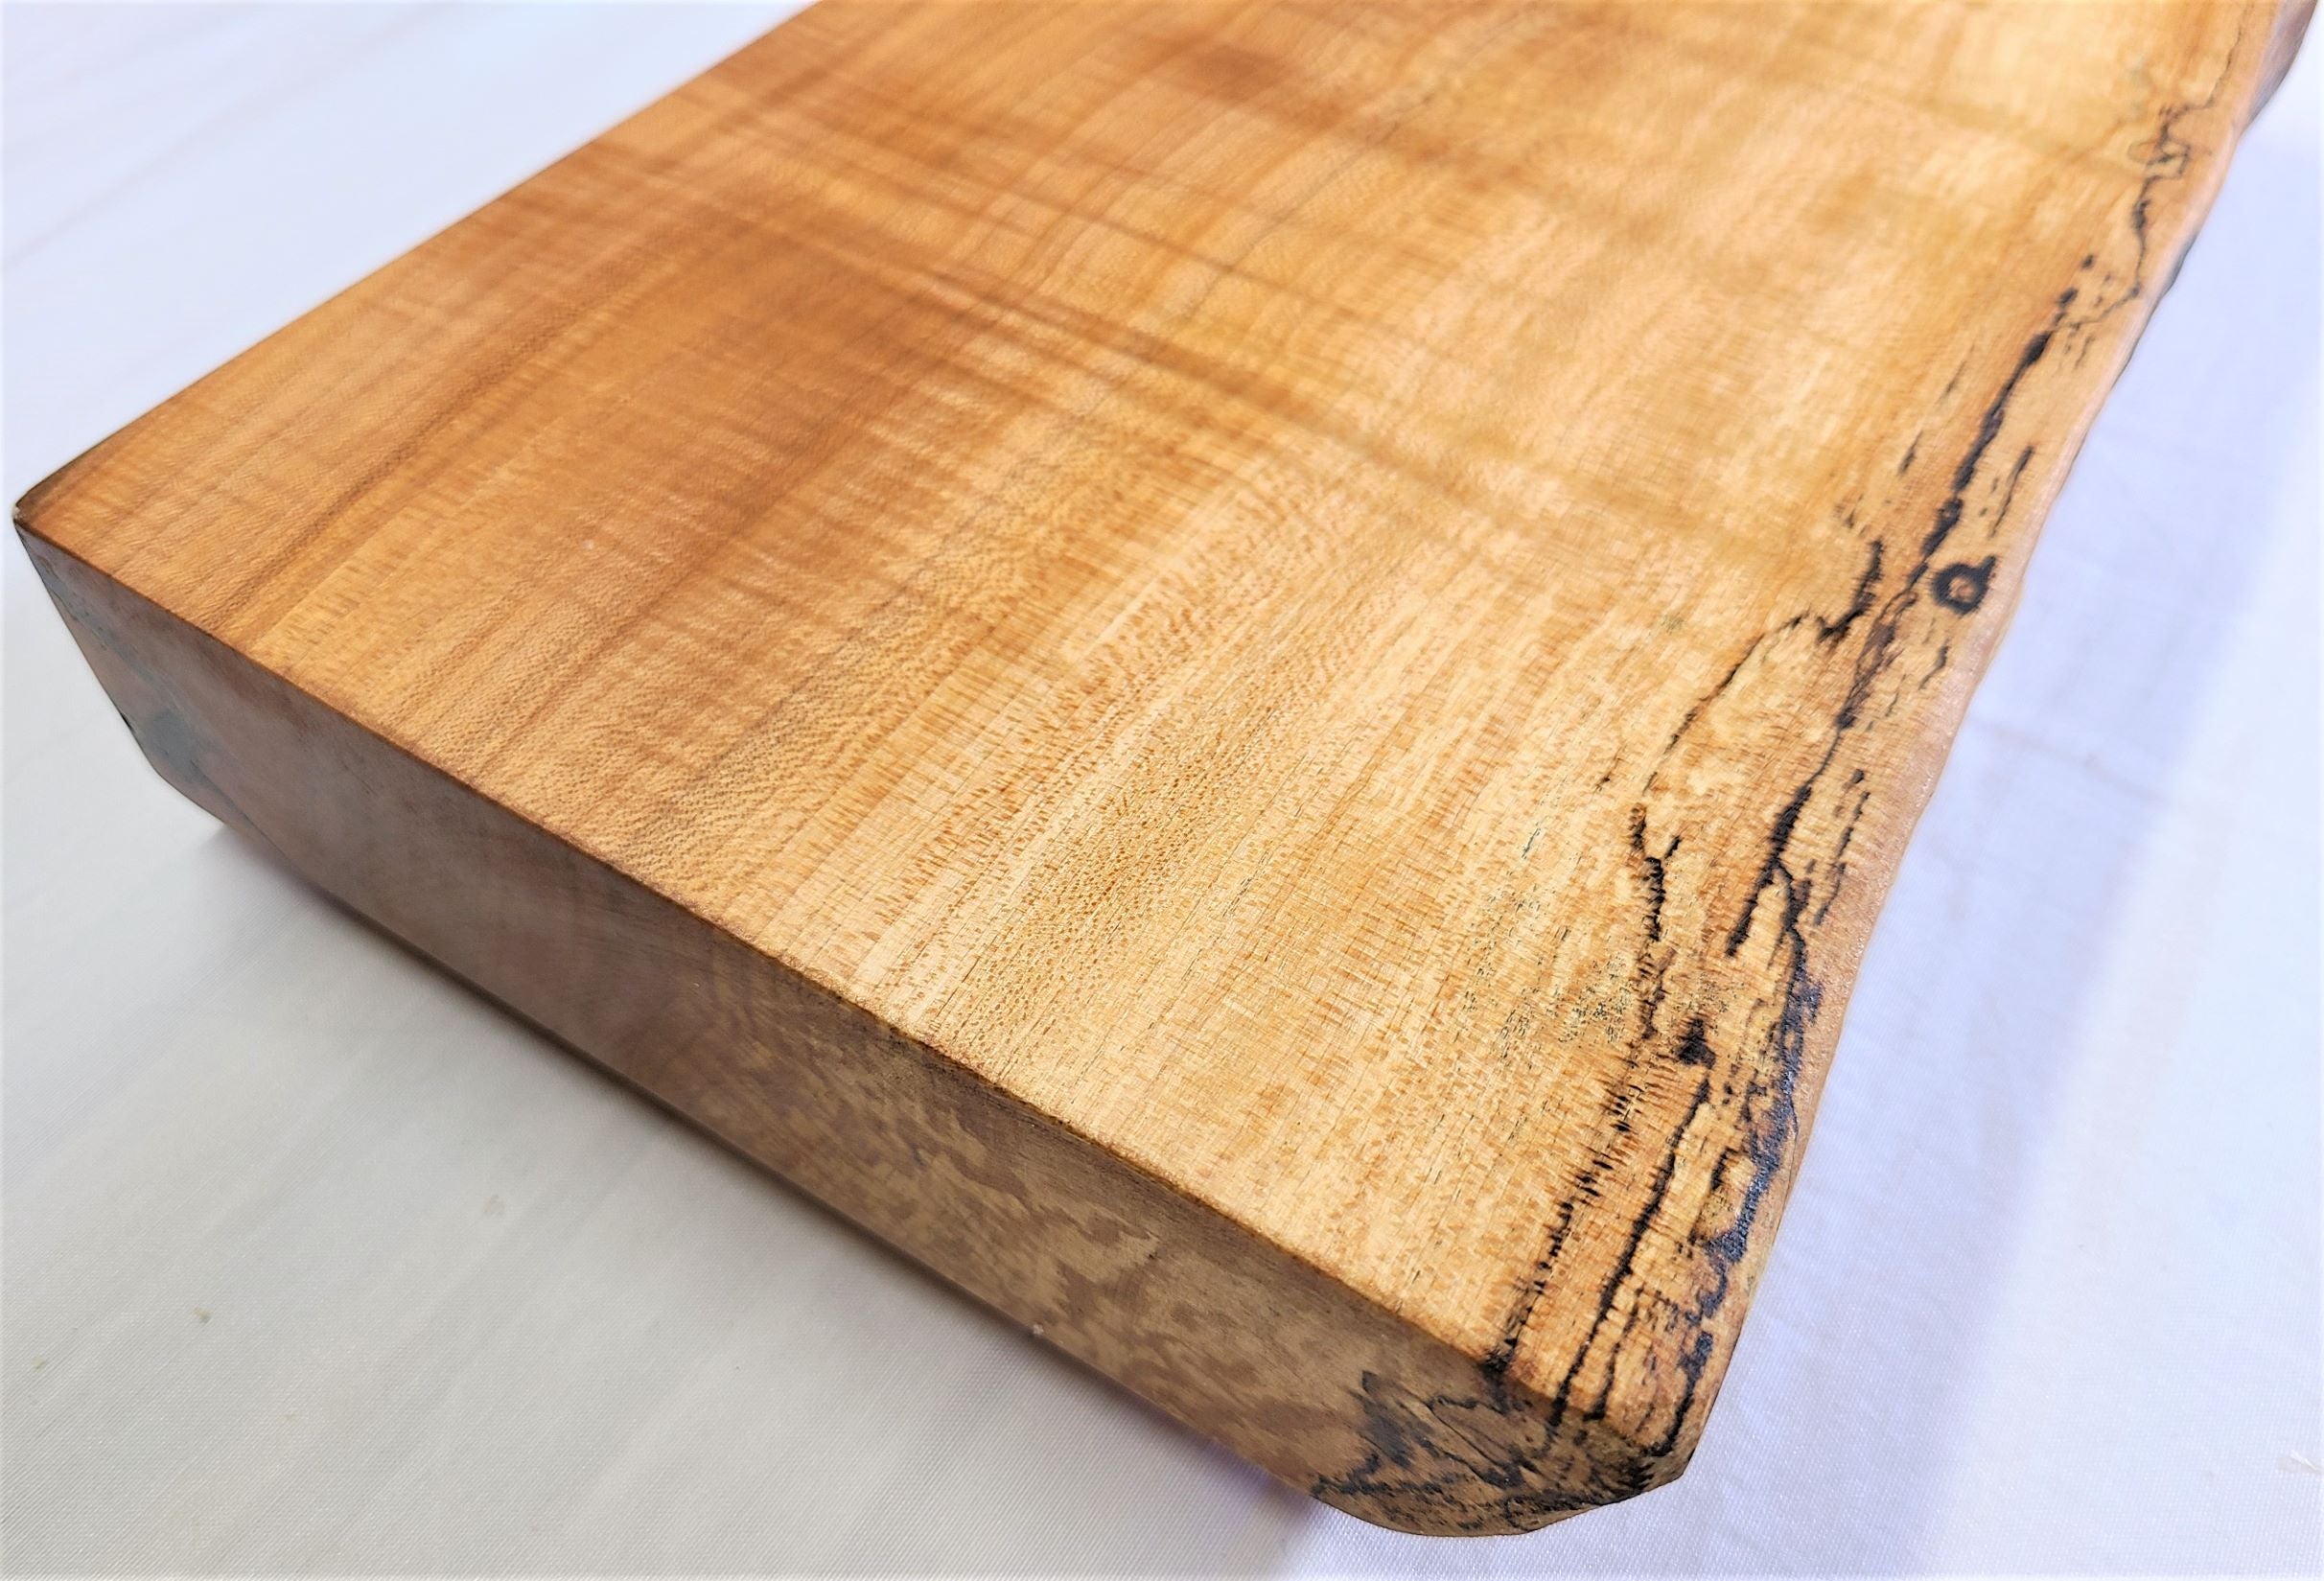 THis view shows how thick our maple wood cutting board is.  Loads of character in this thick solid wood cutting board.  Made in USA by ZIMboards